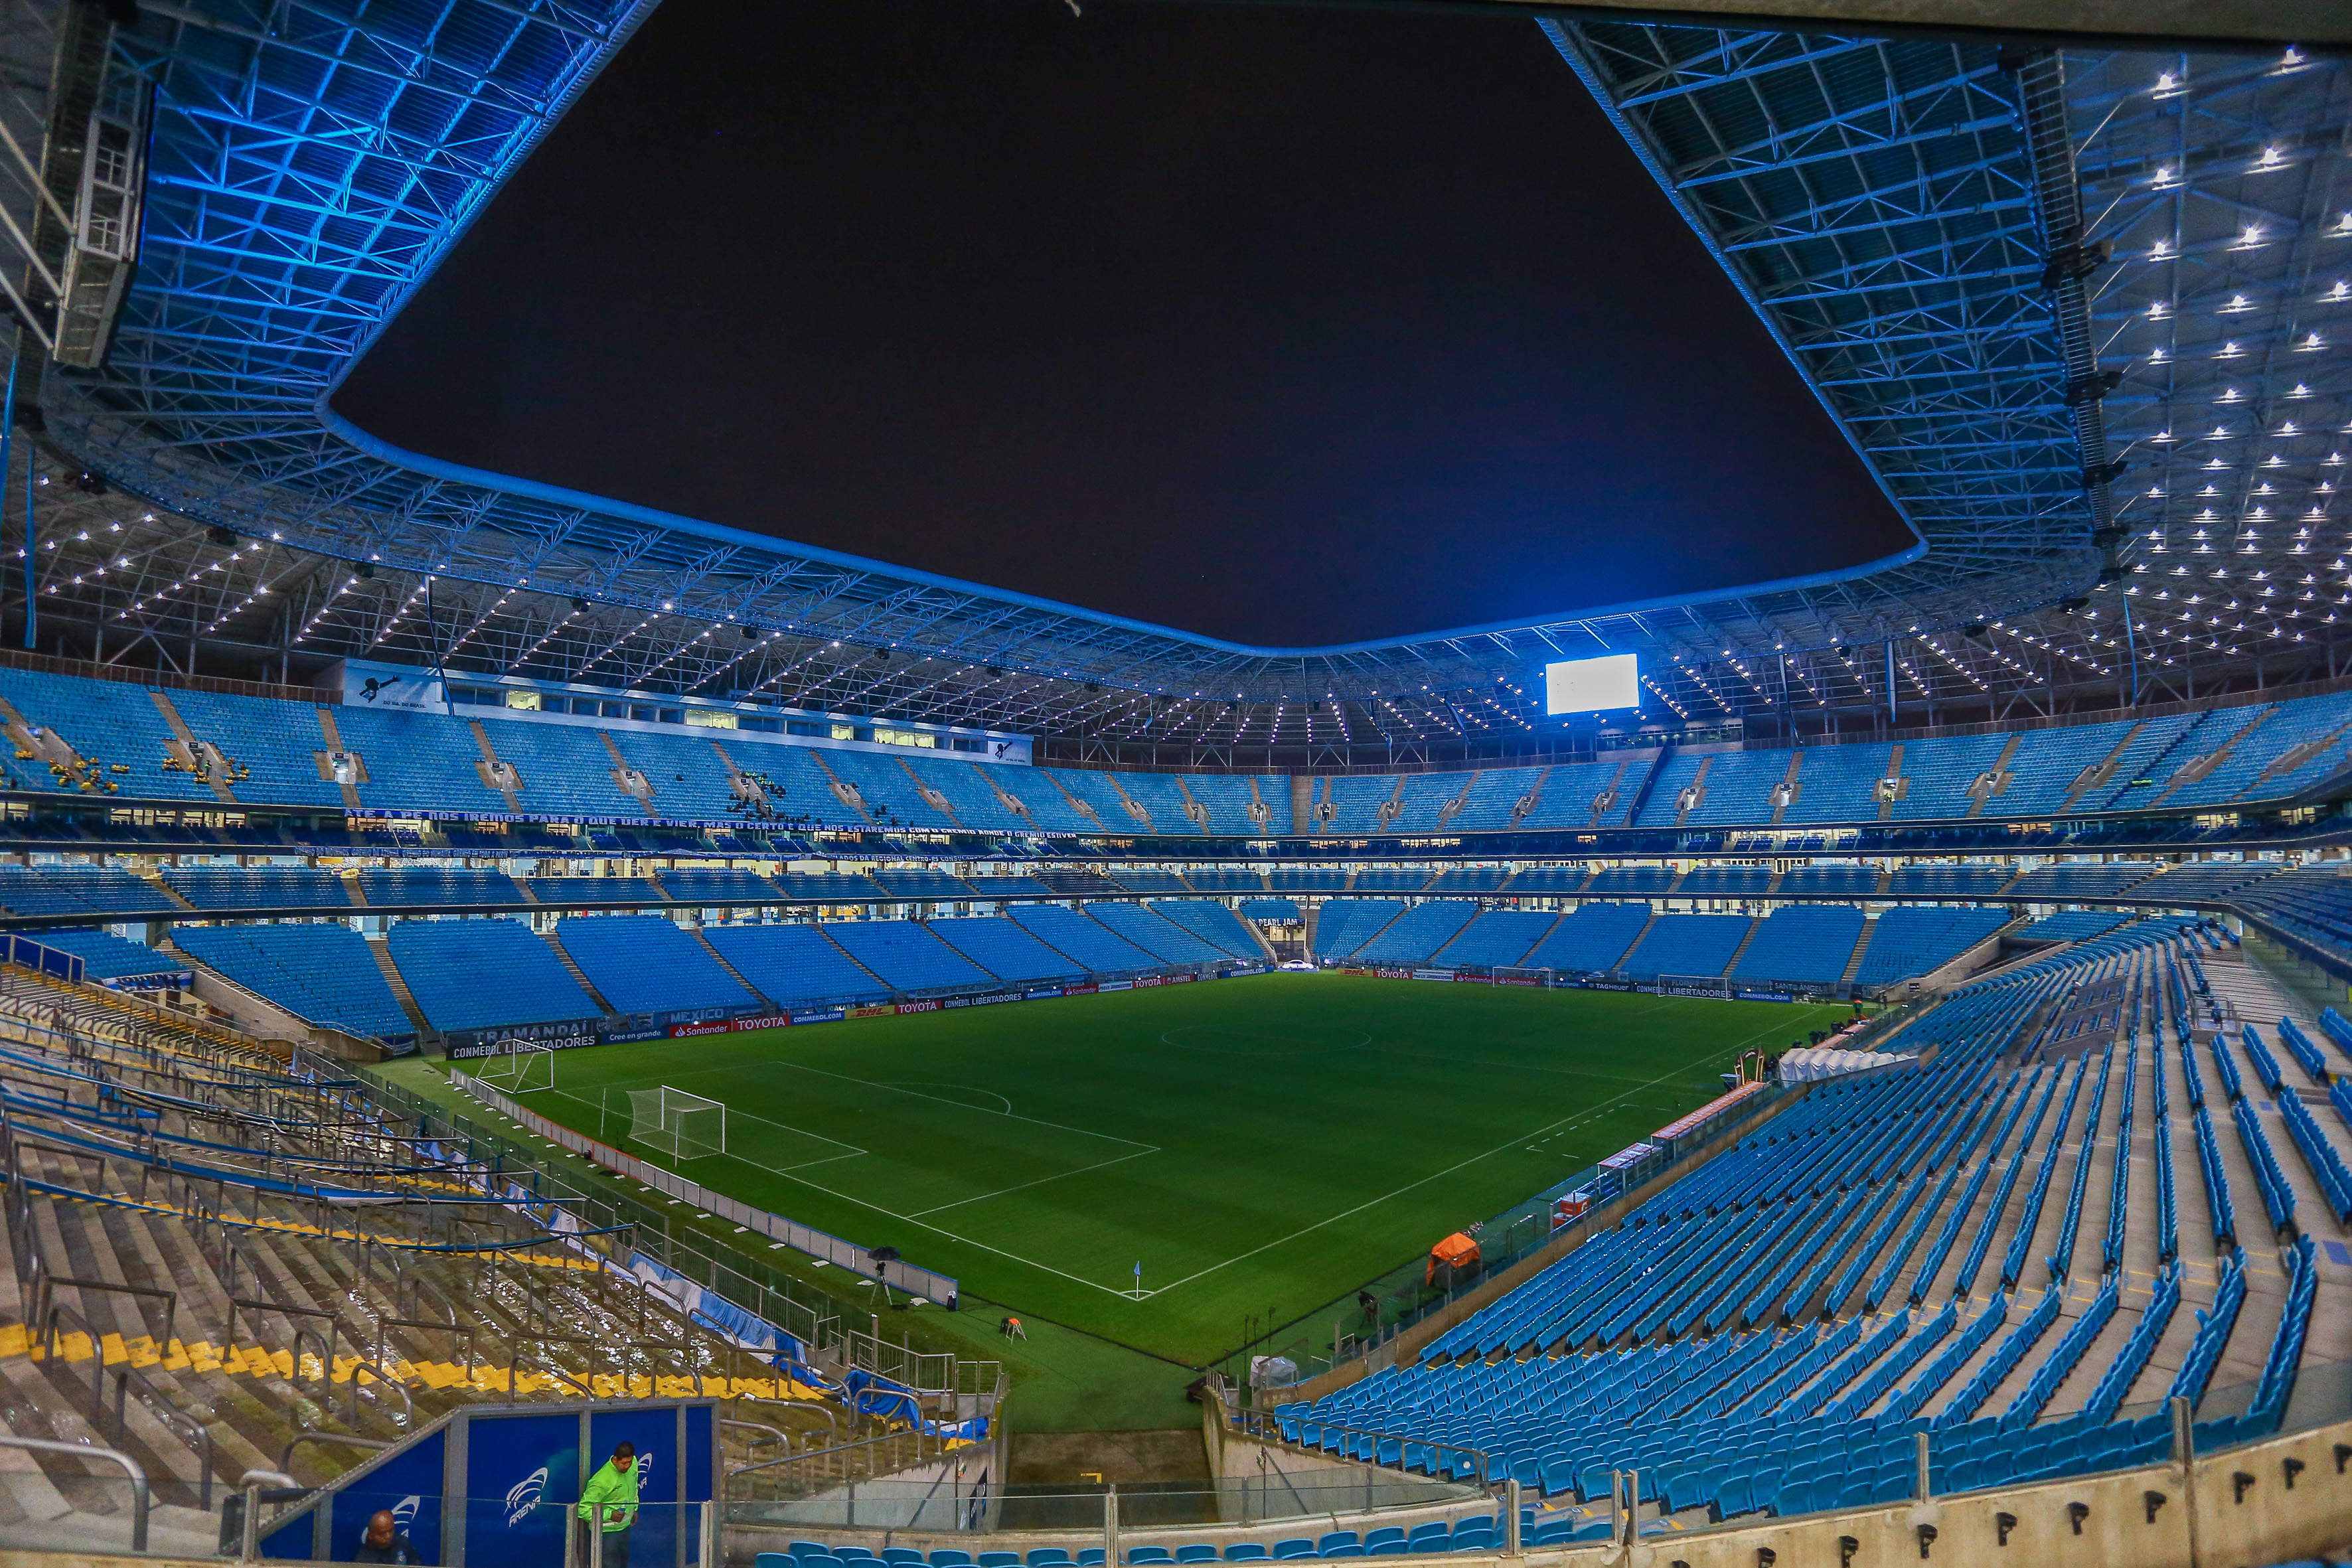 PORTO ALEGRE, BRAZIL - OCTOBER 02: General view of Arena do Gremio before the match between Gremio and Atletico Tucuman as part of Copa Conmebol Libertadores 2018 at Arena do Gremio on October 02, 2018, in Porto Alegre, Brazil. (Photo by Lucas Uebel/Getty Images)